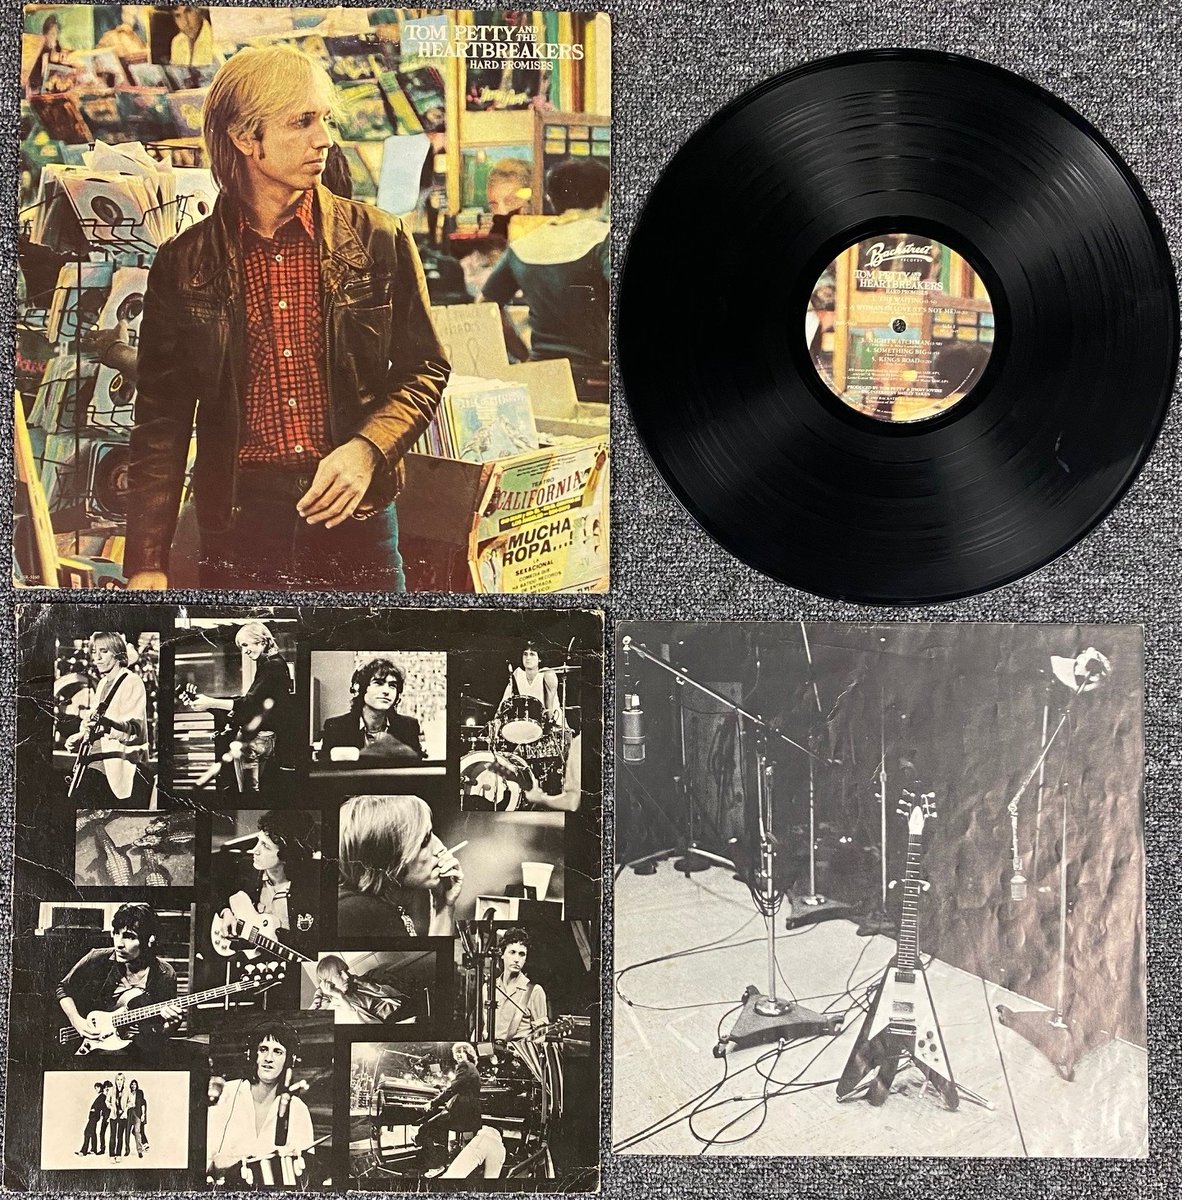 Today in 1981 @TomPetty and the Heartbreakers release their album #HardPromises What are your top 5 #TomPetty songs? - @JoeRockWBAB #Rock #ClassicRock #TomPettyAndTheHeartbreakers #Vinyl #RockOnRock #TodayInRock #WBAB